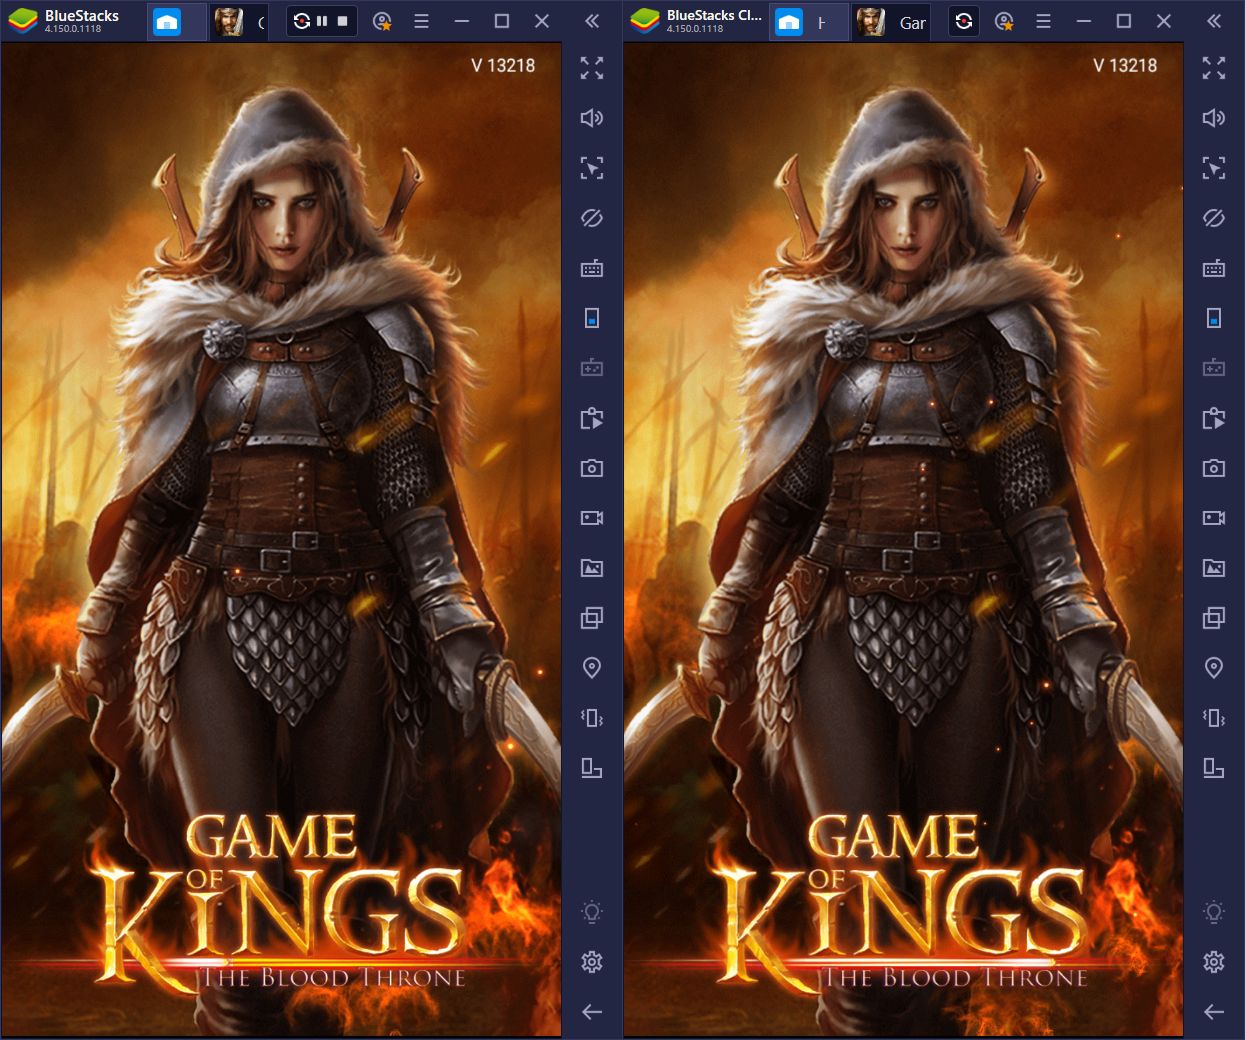 Game of Kings: The Blood Throne on PC – How to Win with BlueStacks